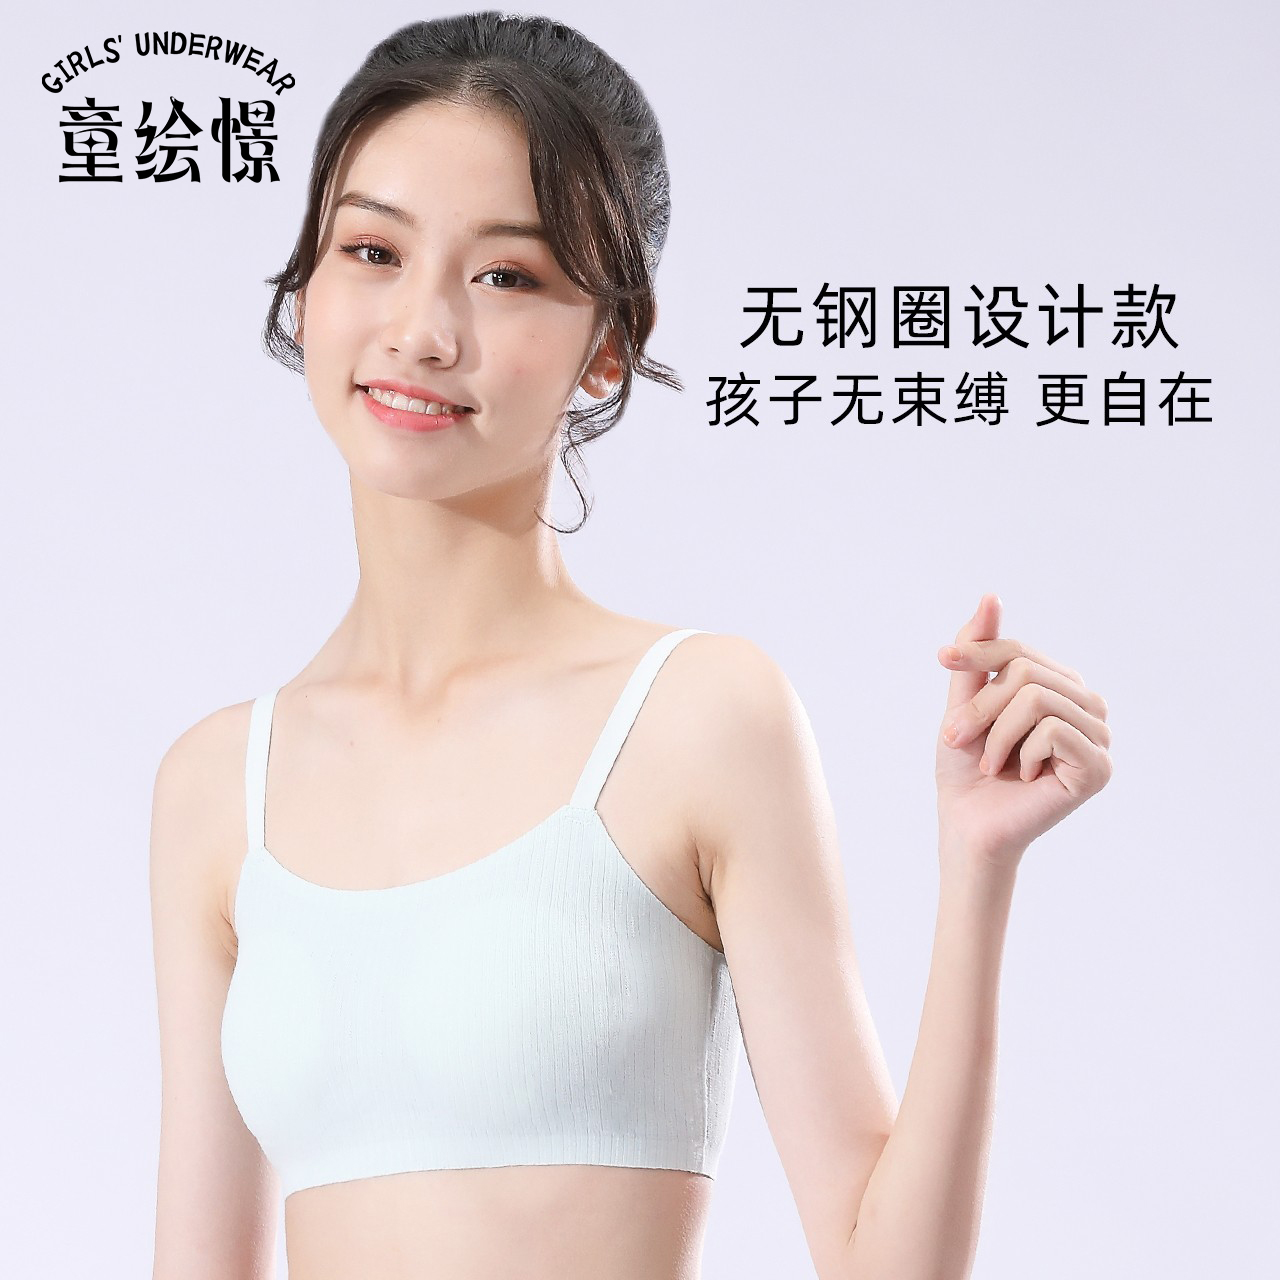 Girls underwear development period girls vest 10-17 years old girls middle  school students high school students high school girls high school bra -   - Buy China shop at Wholesale Price By